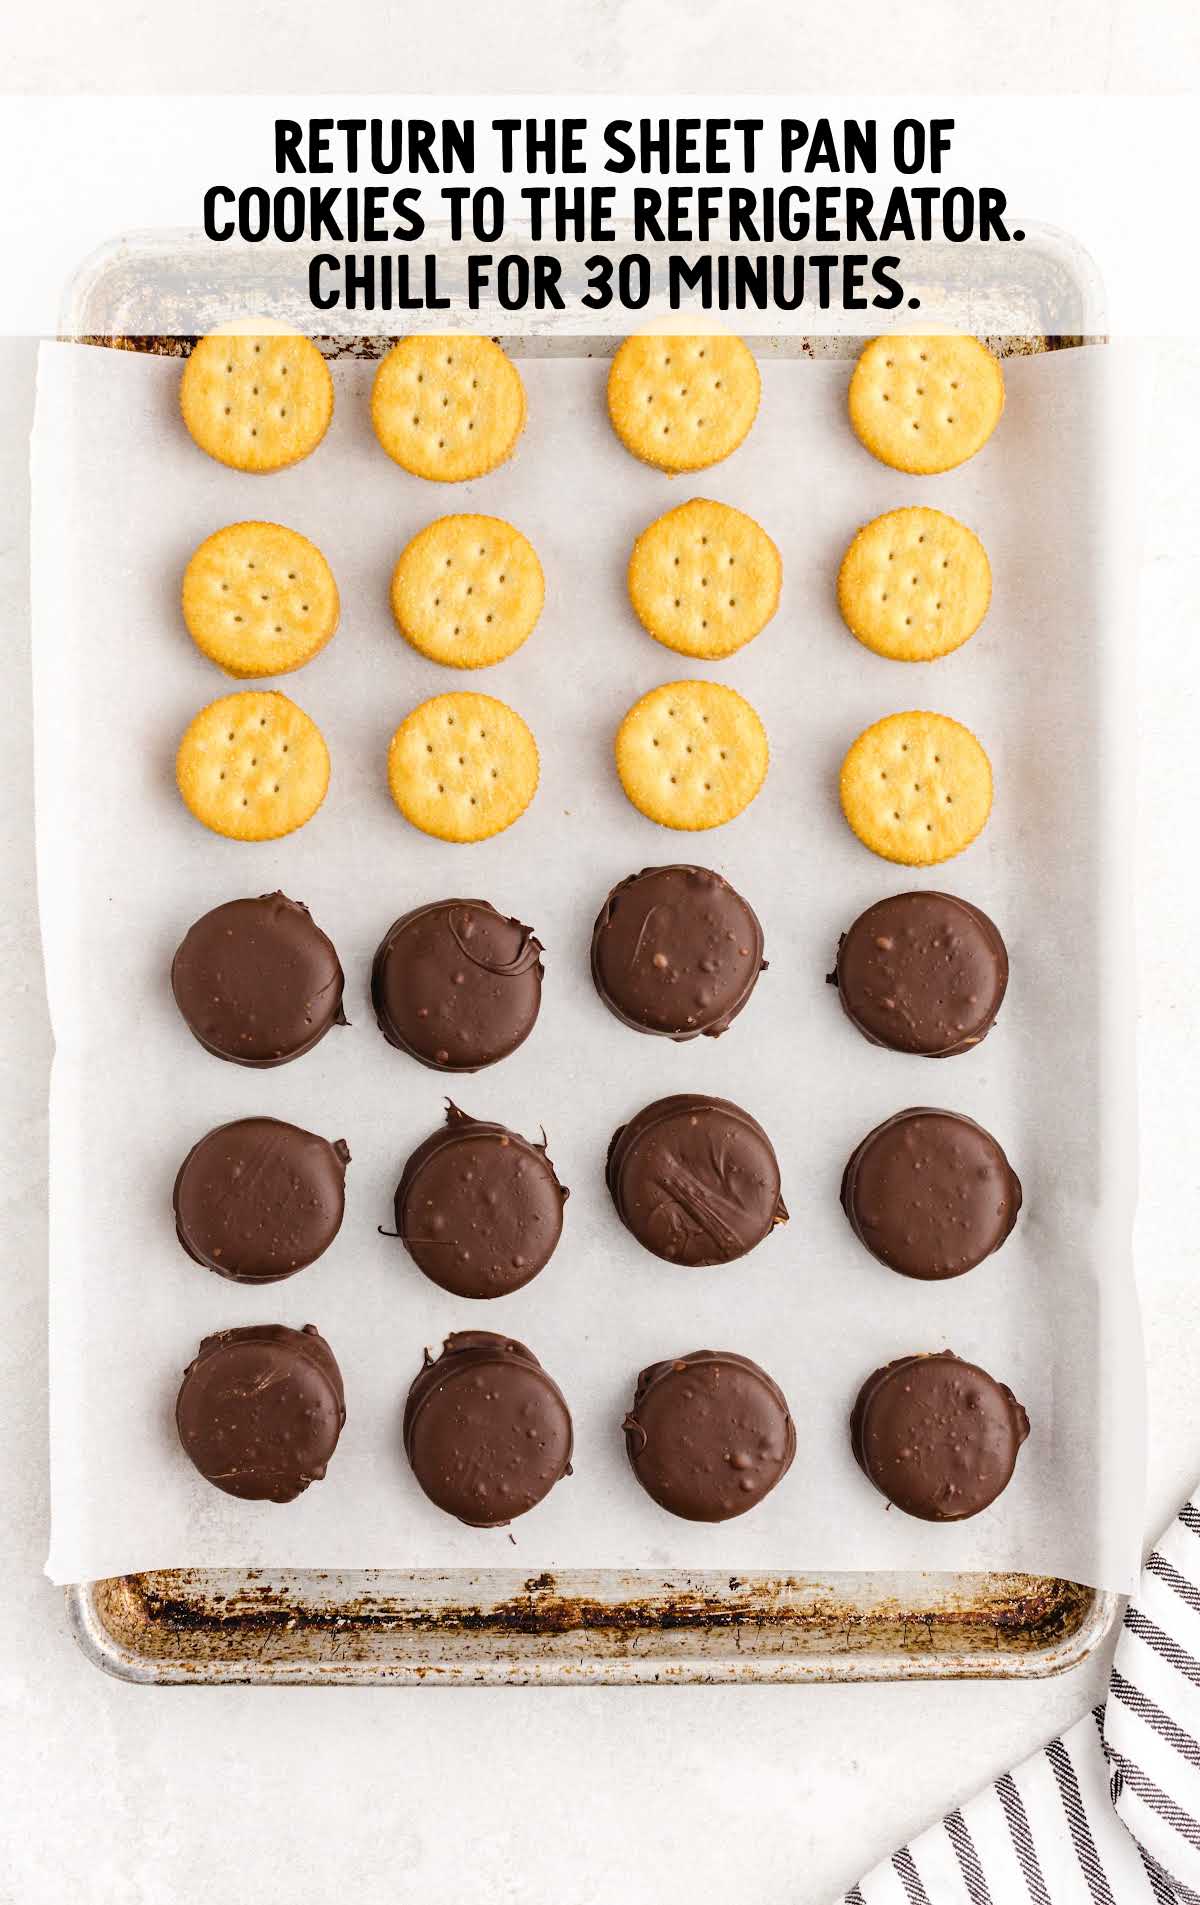 Chocolate Peanut Butter Ritz Cookies chilled on a sheet pan